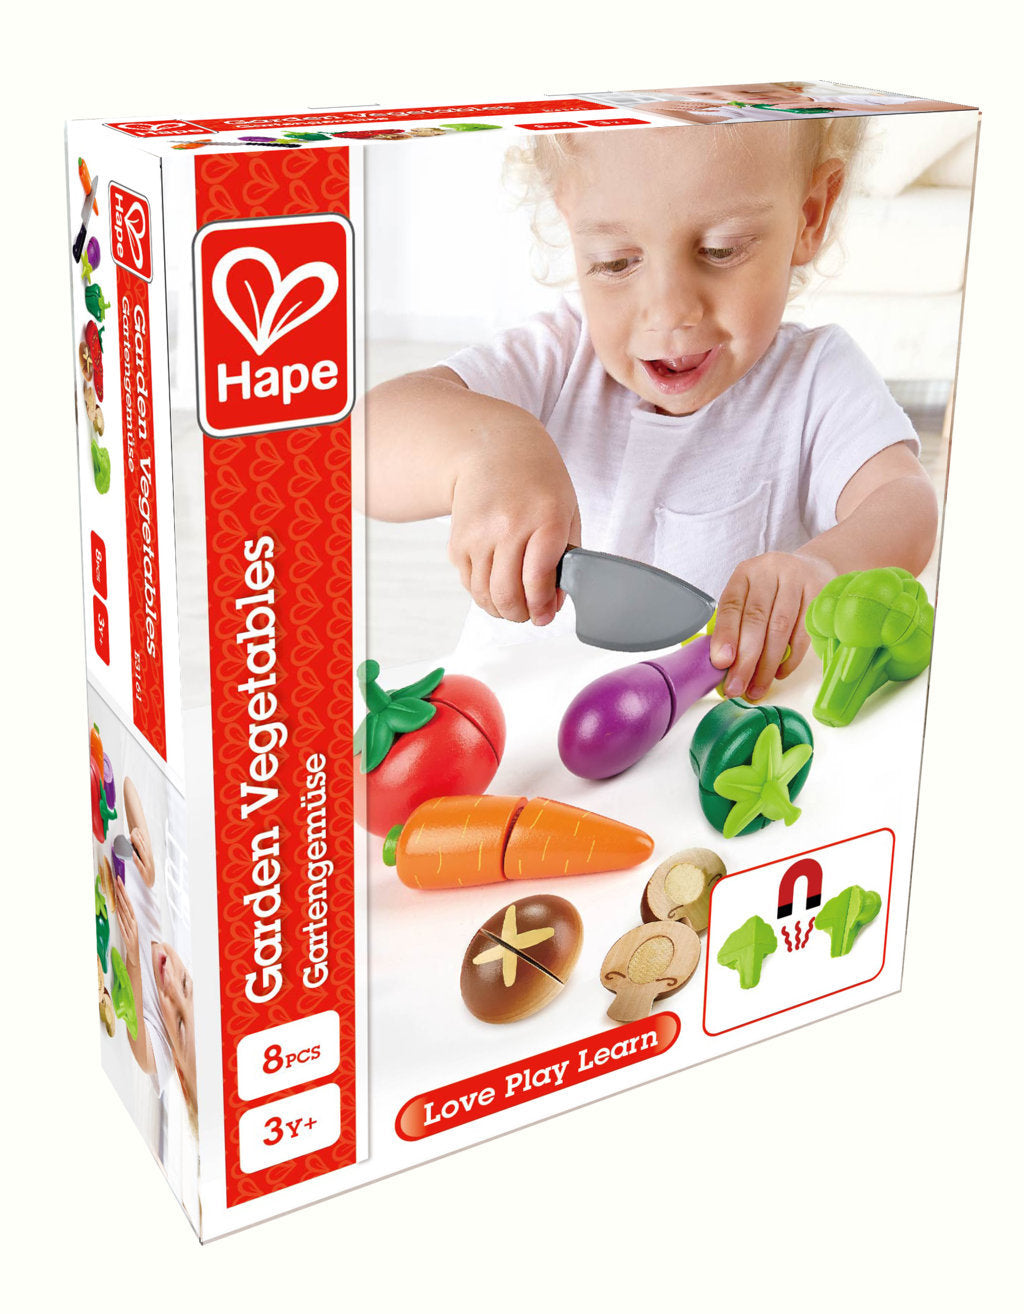 Hape Garden Vegetables imaginative play quality wooden toys The Toy Wagon